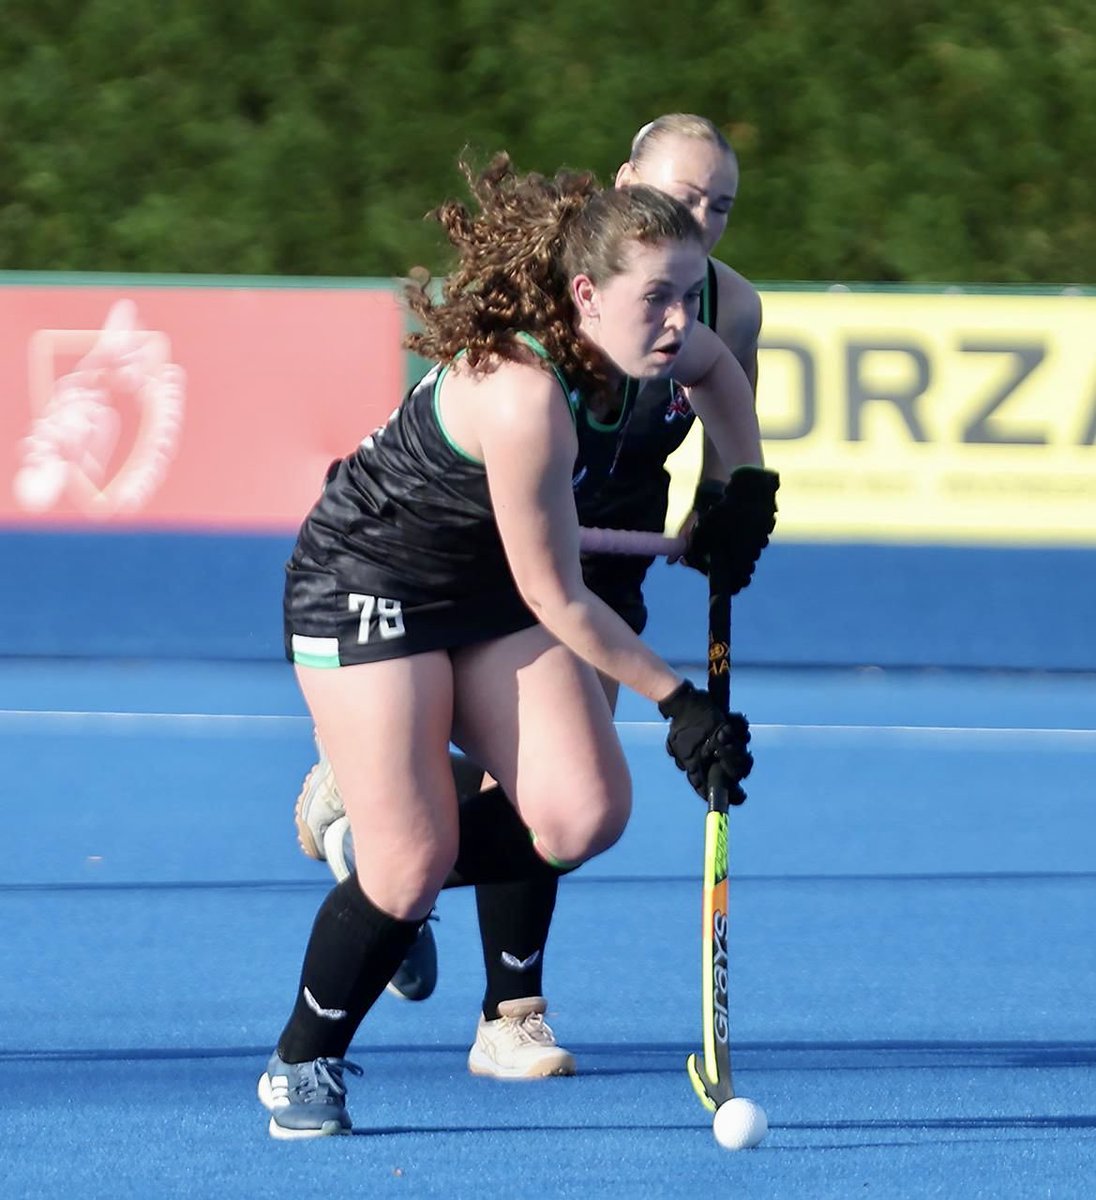 Some great photos captured by @BeefyBennett from the @HockeyWales U21s vs Austria U21s over Easter. Brilliant to watch @ForeyLiv in her debut test series at this level, who played her heart out - always super proud to watch! @SwanseaHC @BassalegPE @GraysHockey